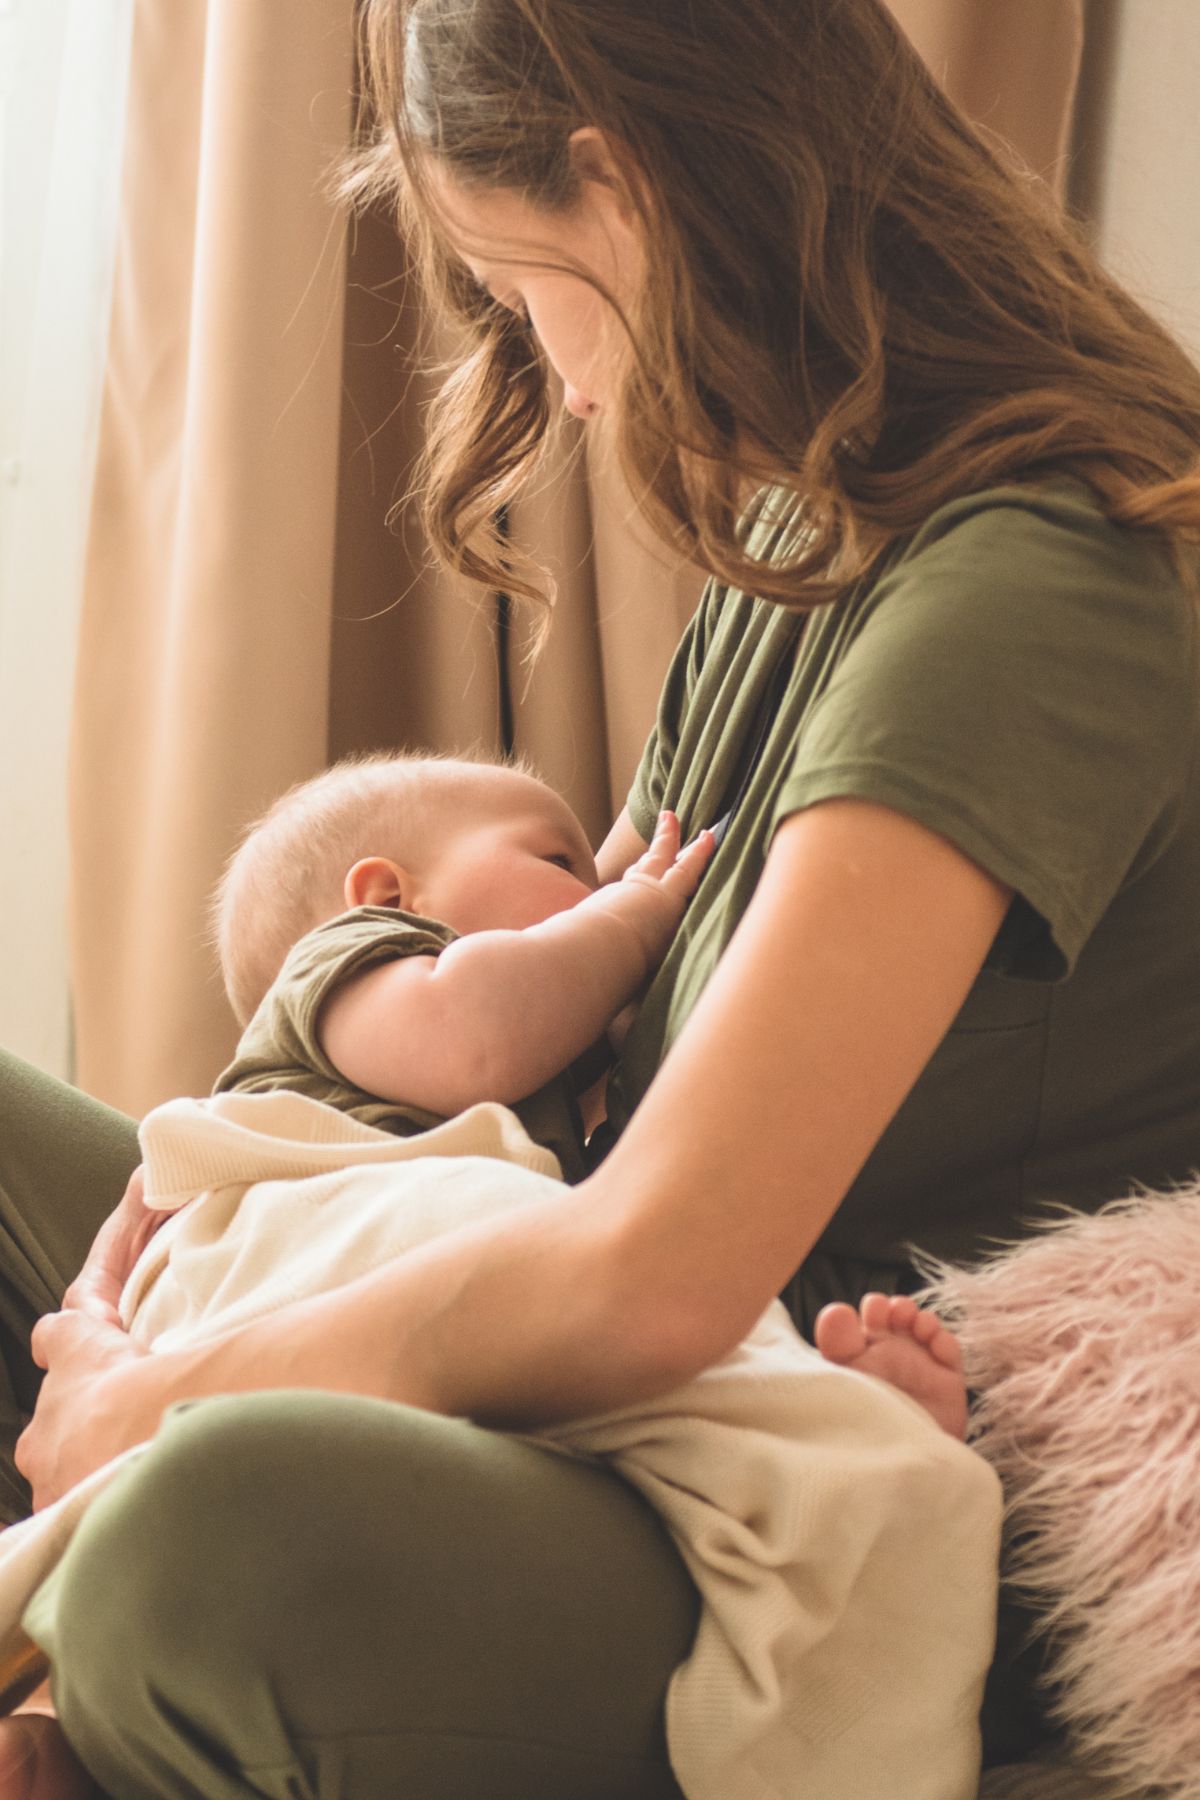 A woman in a green shirt and pants breastfeeding her baby on a bed.